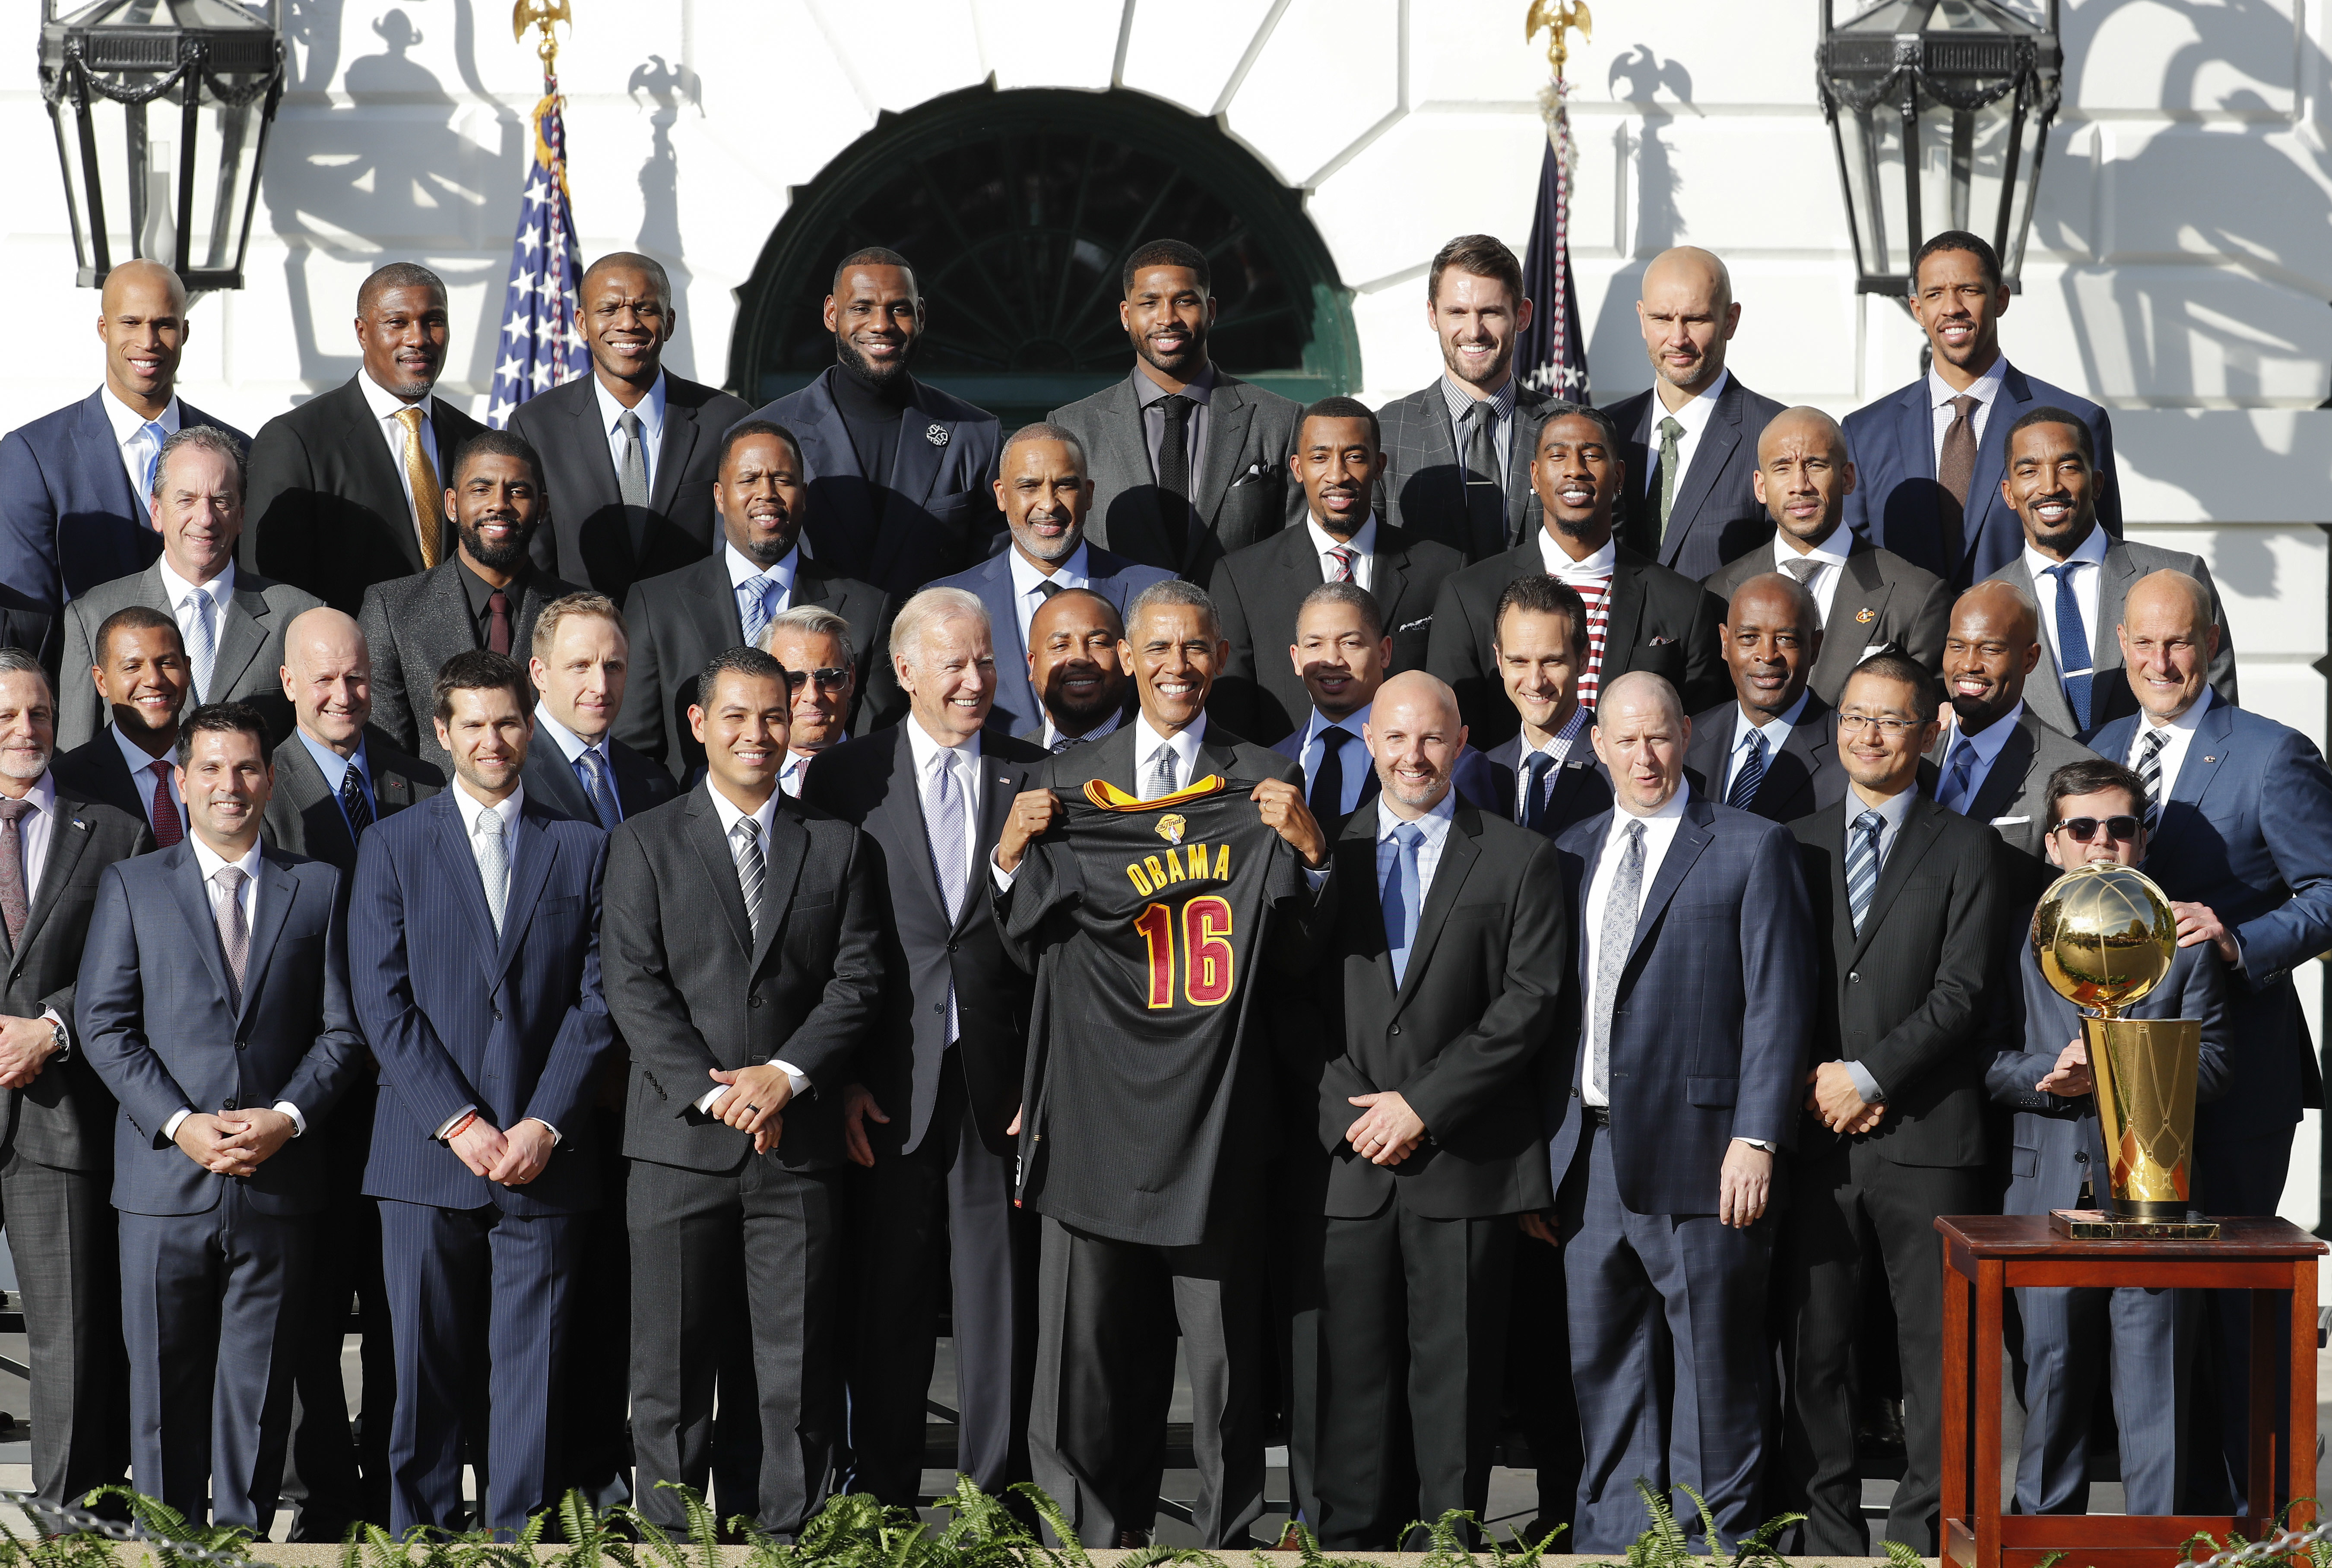 President Barack Obama and Vice President Joe Biden poses for a group photograph with Cleveland Cavaliers team members as the president honored the 2016 NBA Champions Cleveland Cavaliers basketball team during a ceremony on the South Lawn of the White House in Washington, Thursday, Nov. 10, 2016. (AP Photo/Pablo Martinez Monsivais)